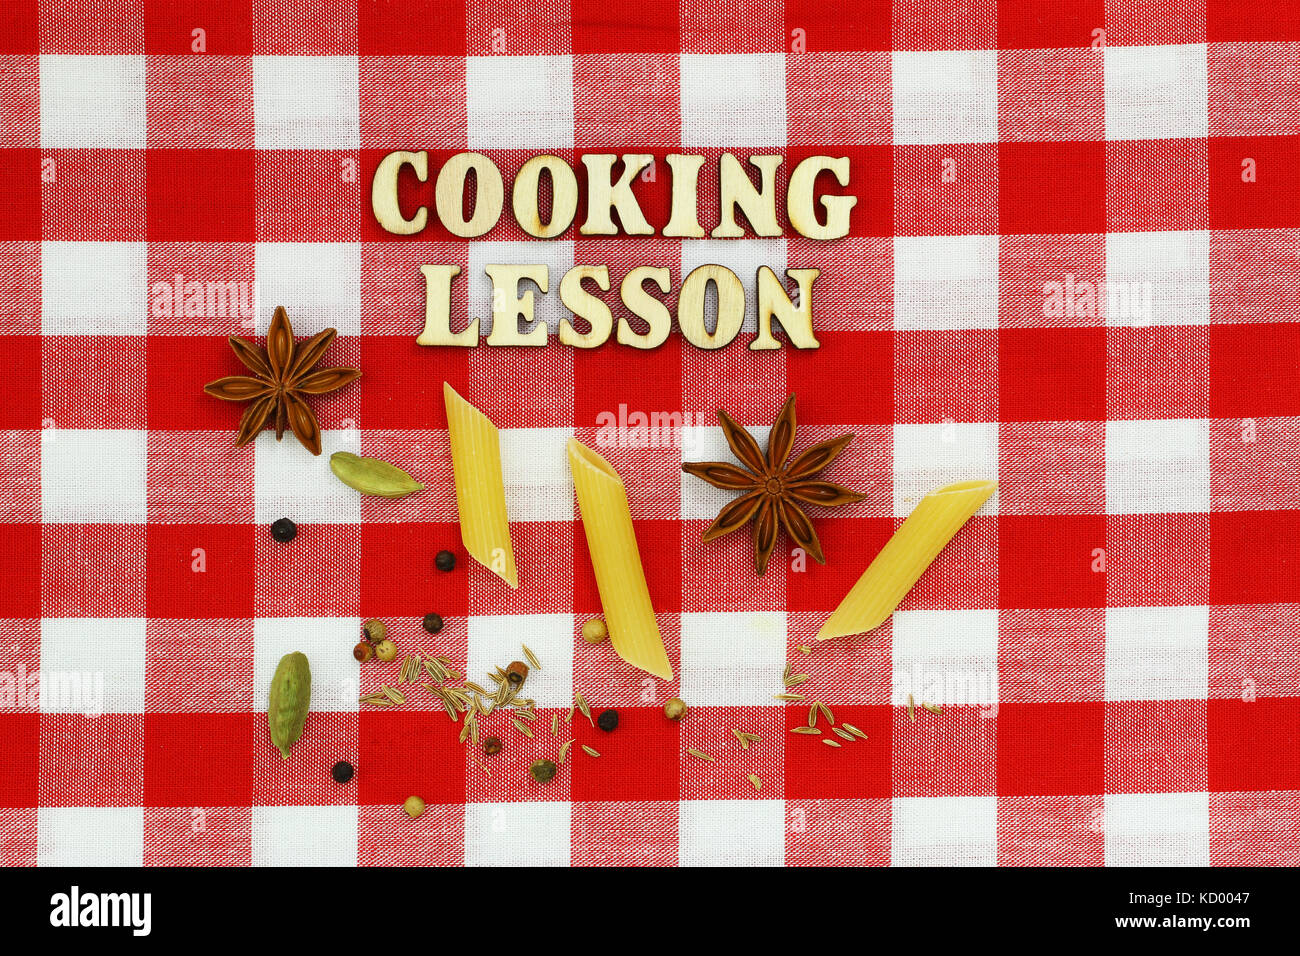 Cooking lesson written with wooden letters, pasta and spices on red and white checkered cloth Stock Photo